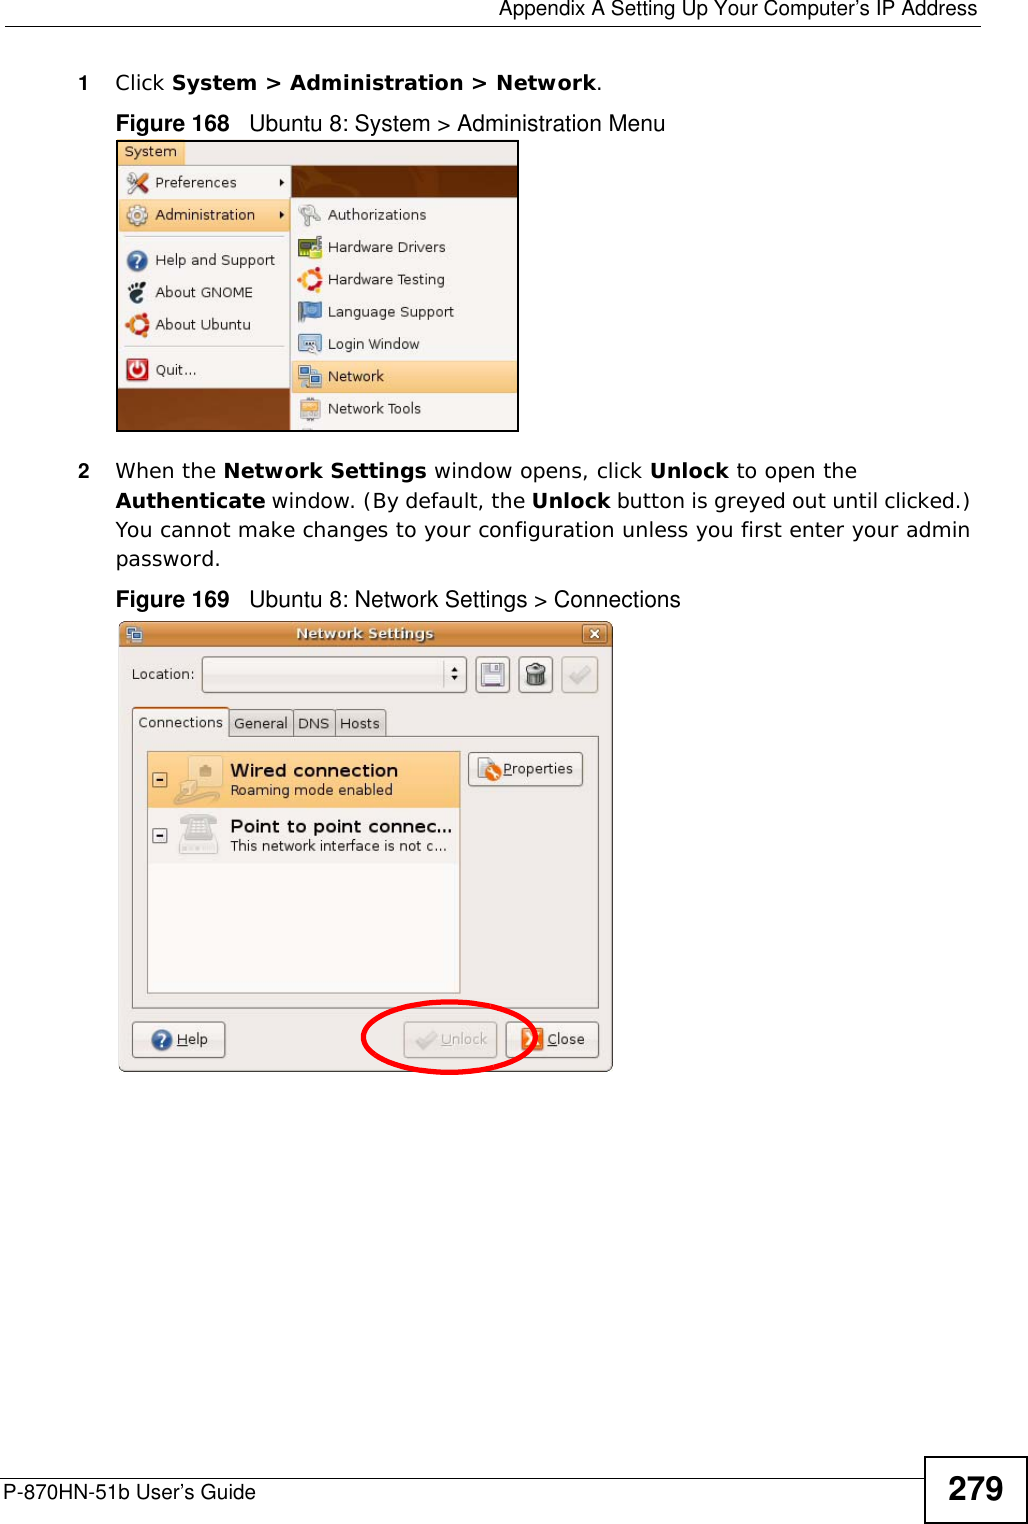  Appendix A Setting Up Your Computer’s IP AddressP-870HN-51b User’s Guide 2791Click System &gt; Administration &gt; Network.Figure 168   Ubuntu 8: System &gt; Administration Menu2When the Network Settings window opens, click Unlock to open the Authenticate window. (By default, the Unlock button is greyed out until clicked.) You cannot make changes to your configuration unless you first enter your admin password.Figure 169   Ubuntu 8: Network Settings &gt; Connections